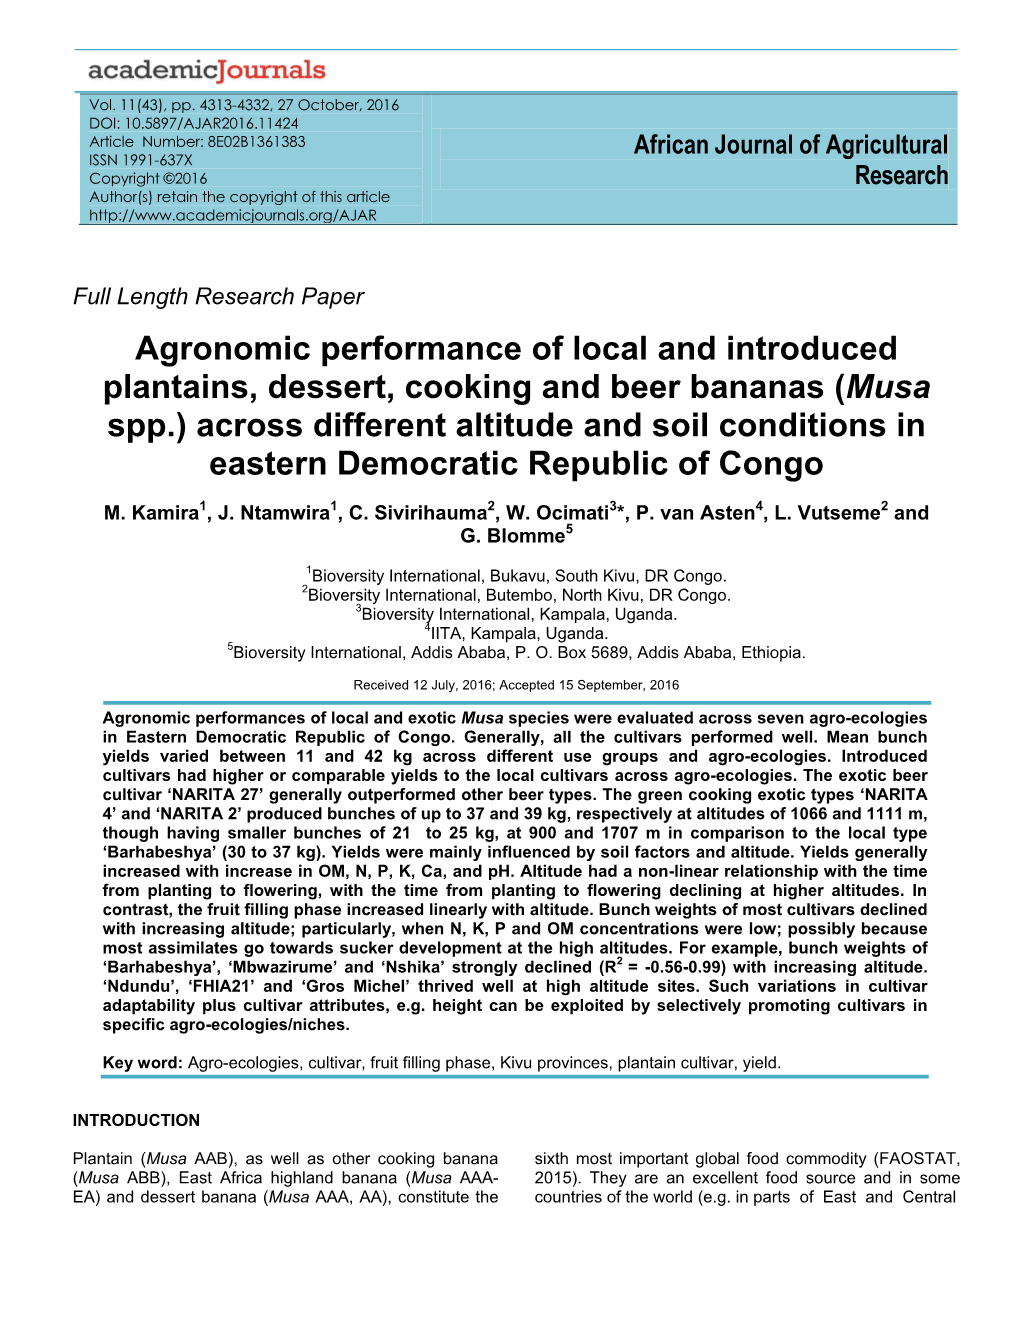 Agronomic Performance of Local and Introduced Plantains, Dessert